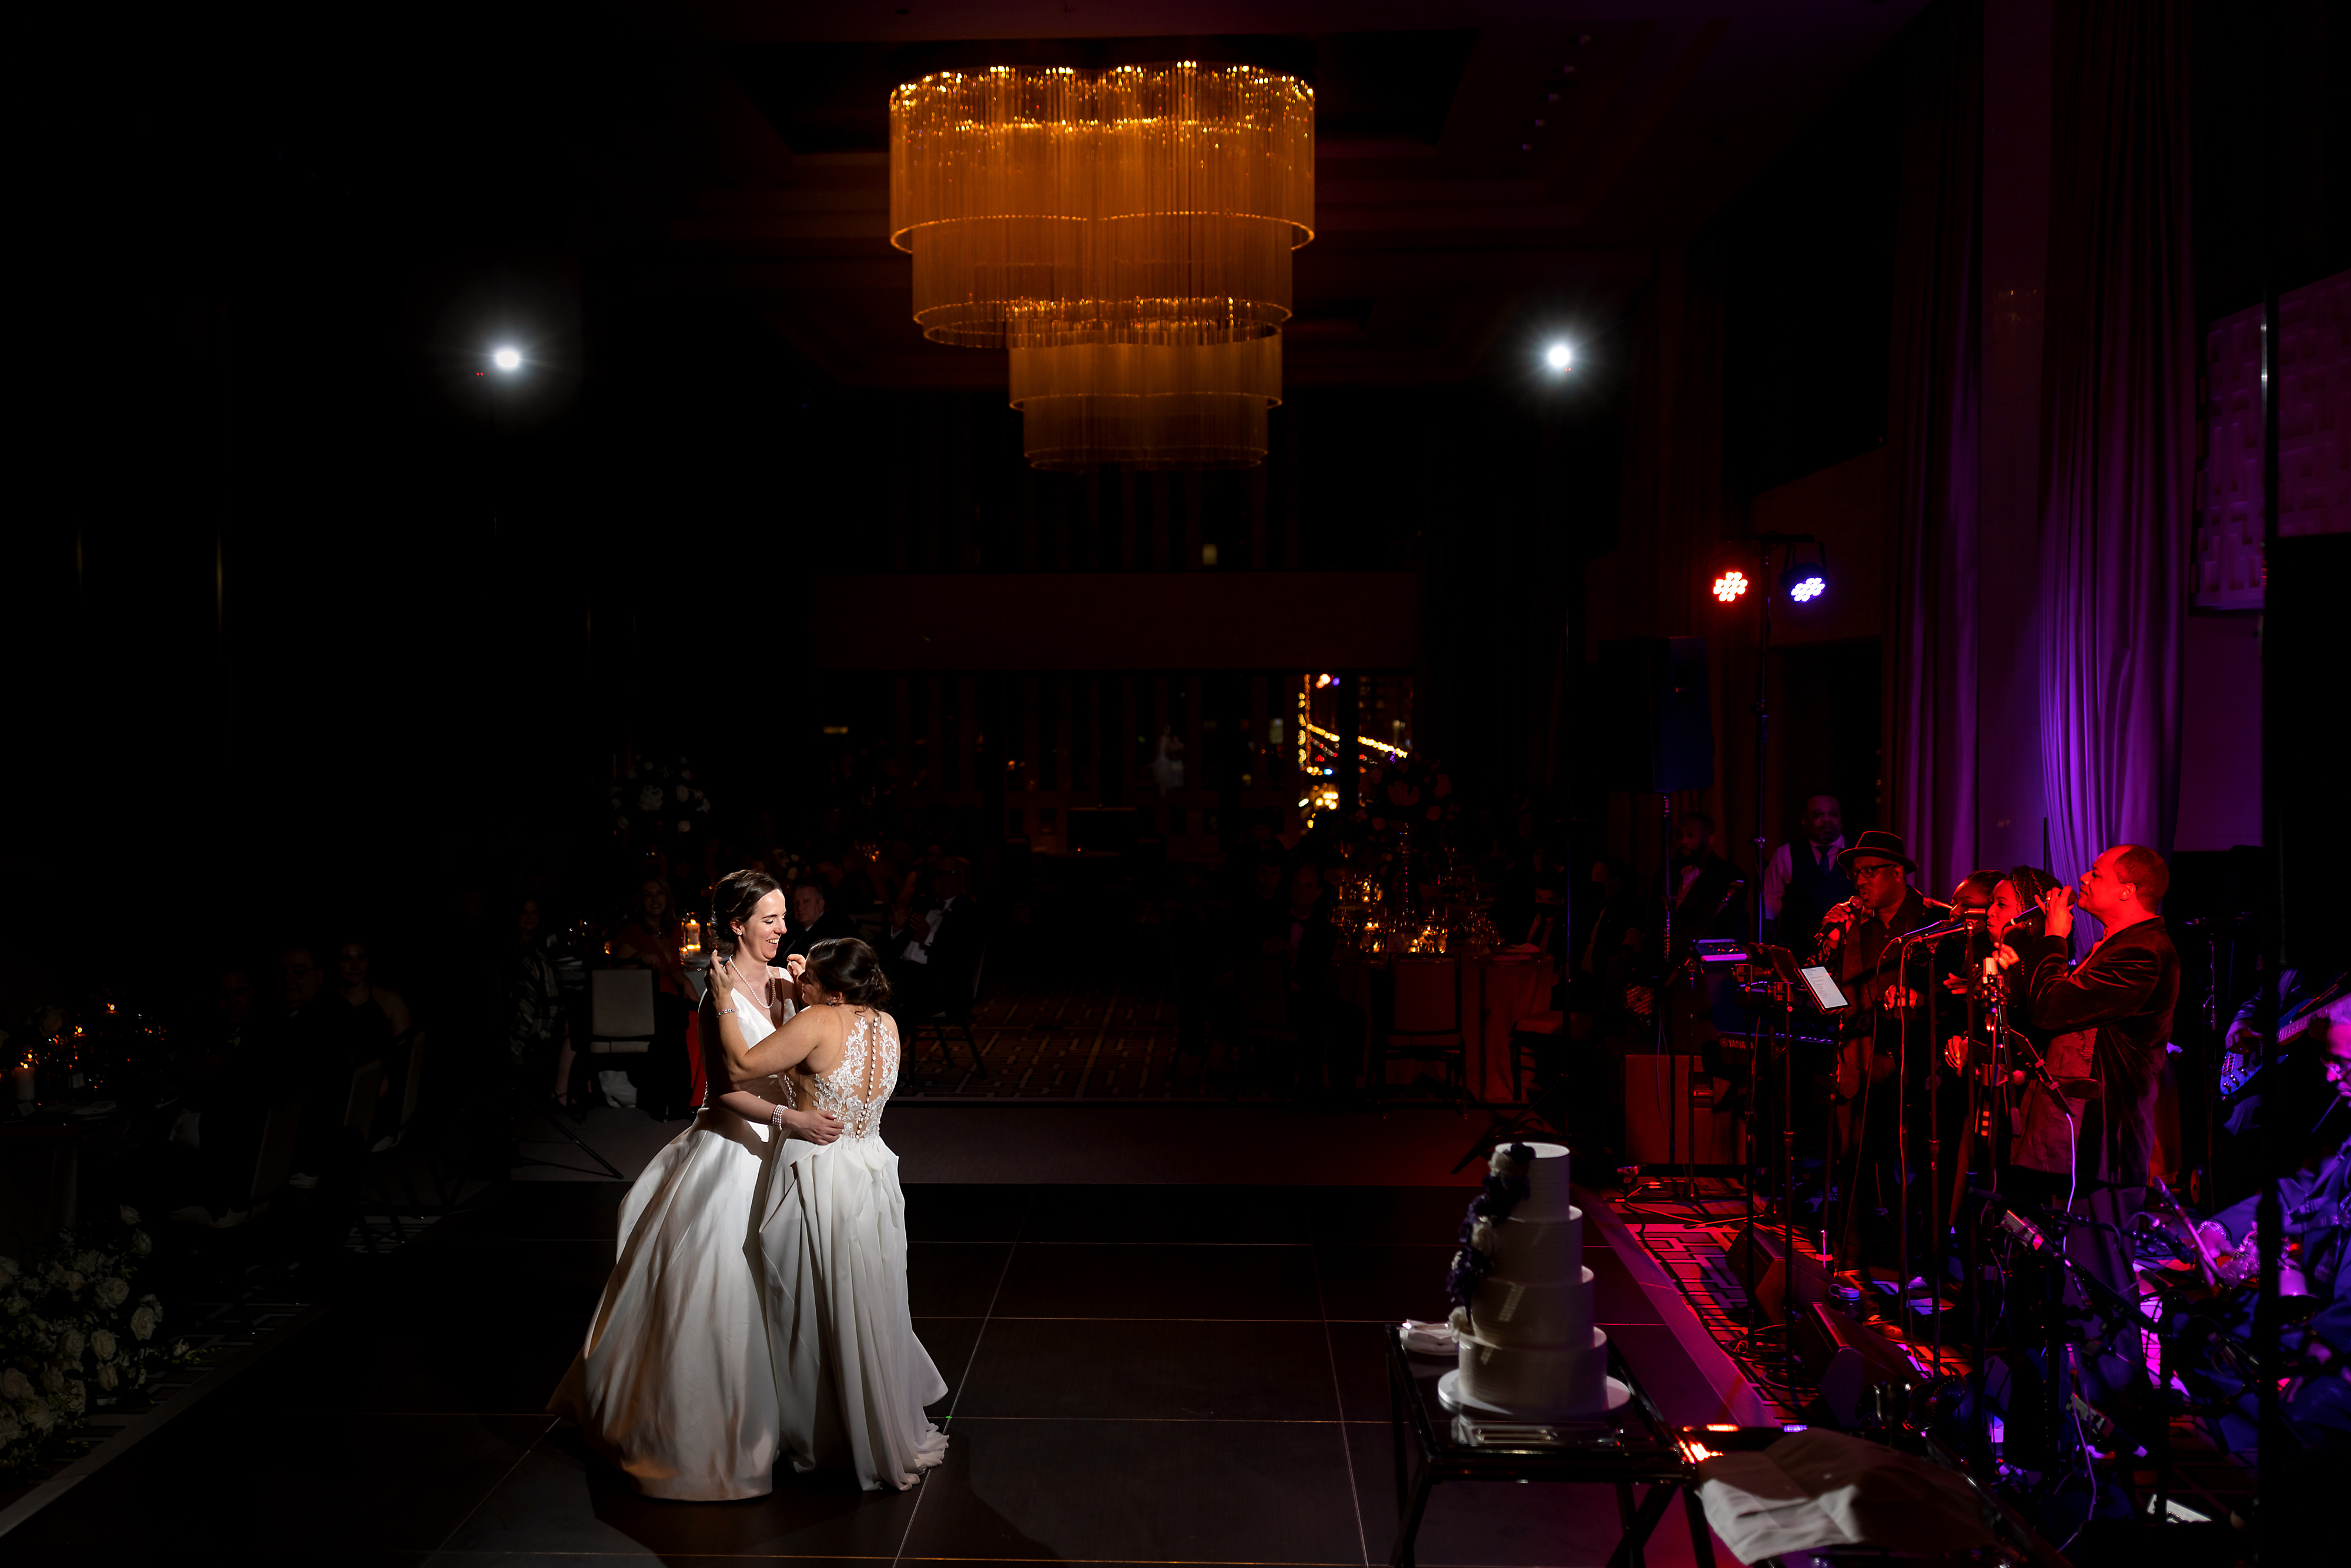 Brides share first dance during wedding reception at The Langham Hotel in downtown Chicago